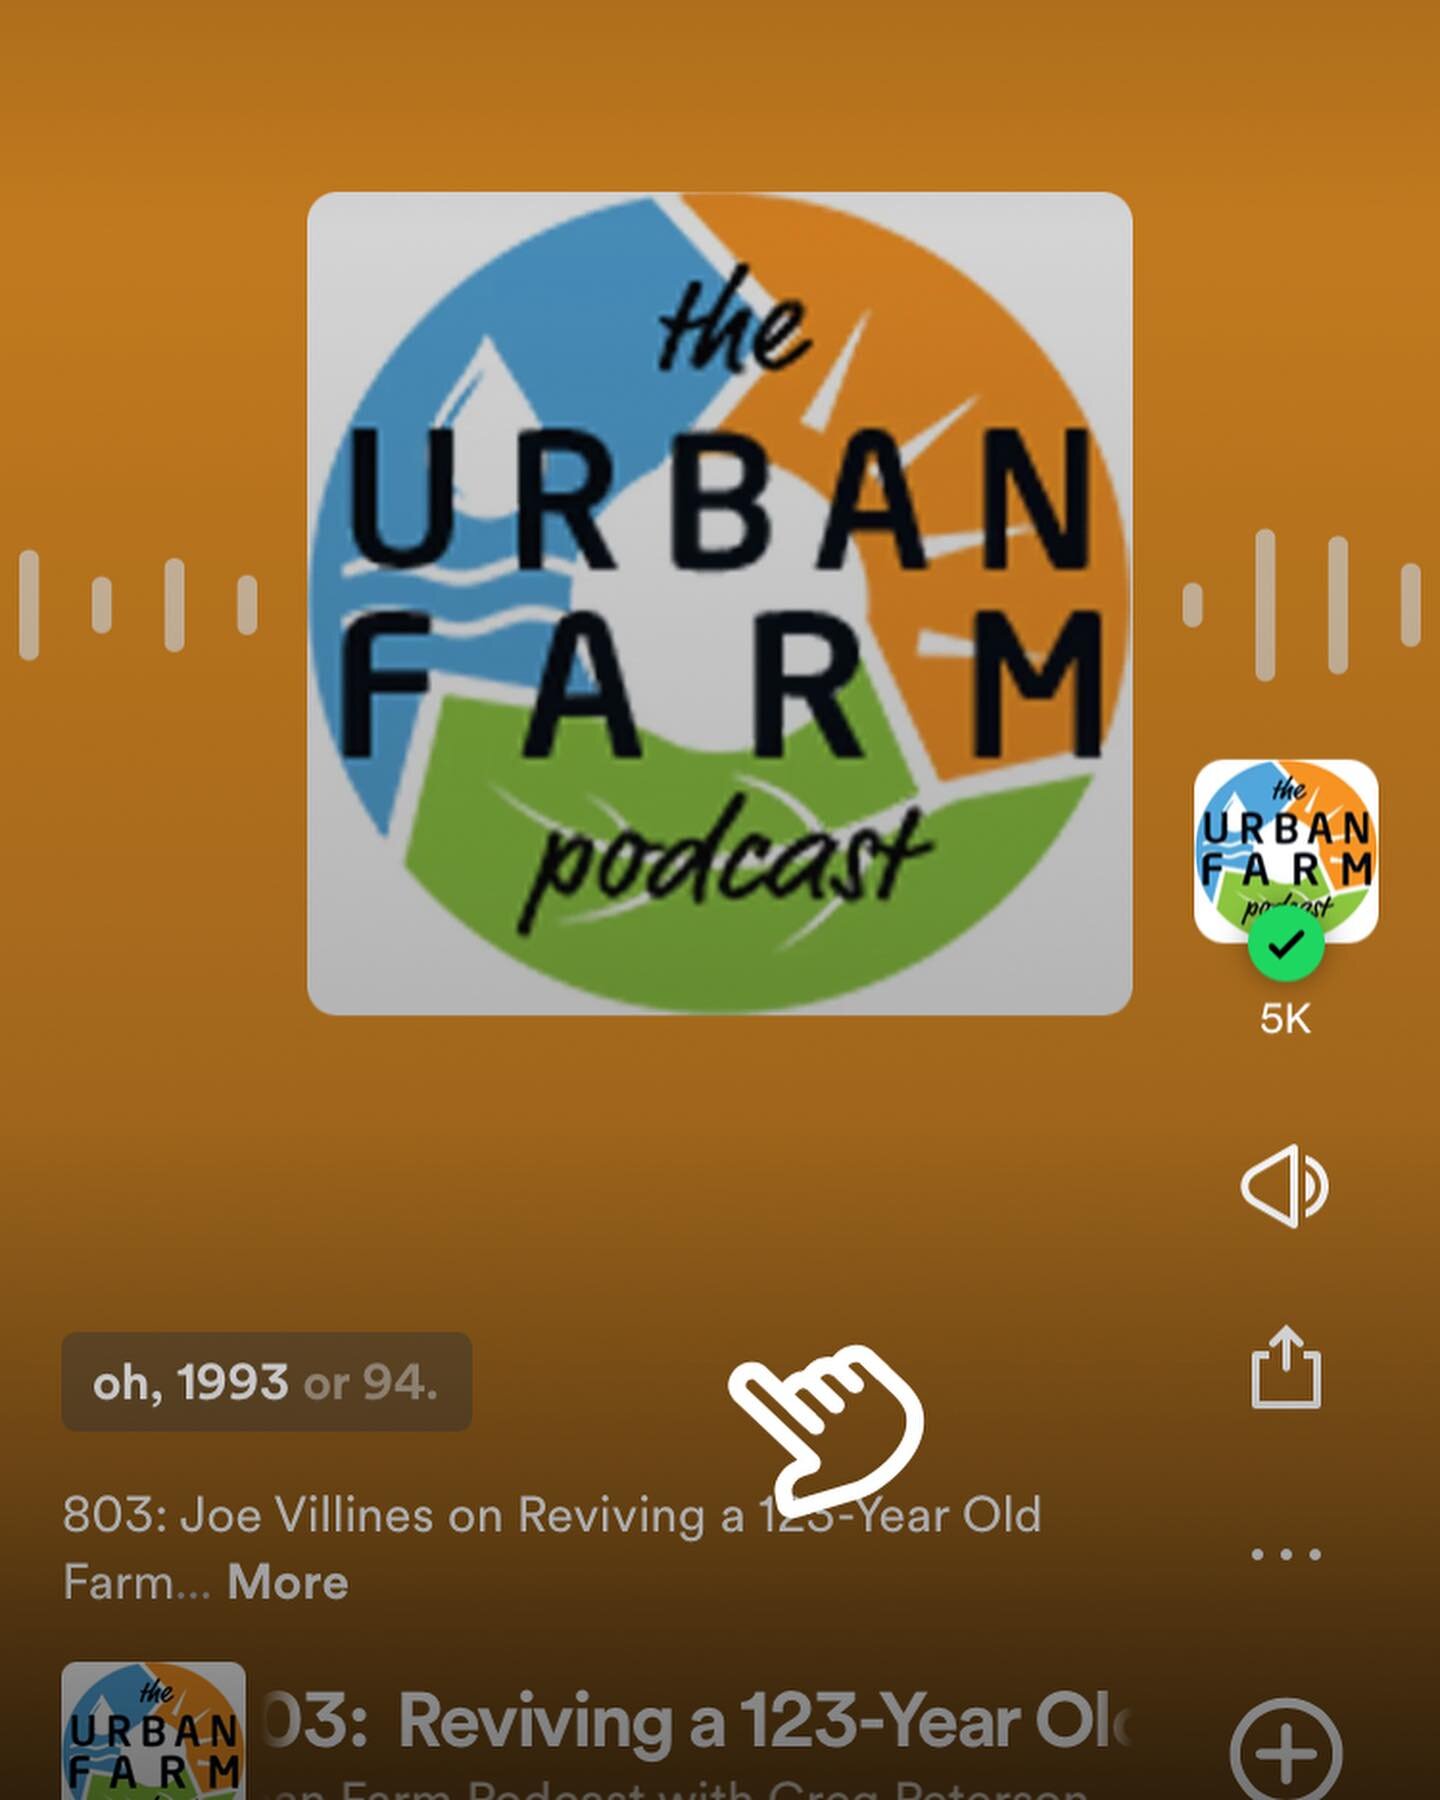 Check out the latest interview on The Urban Farm Podcast with Indianola based @halfacrefarms 
It was great to hear more of their story and practices they are using! Episode 803.